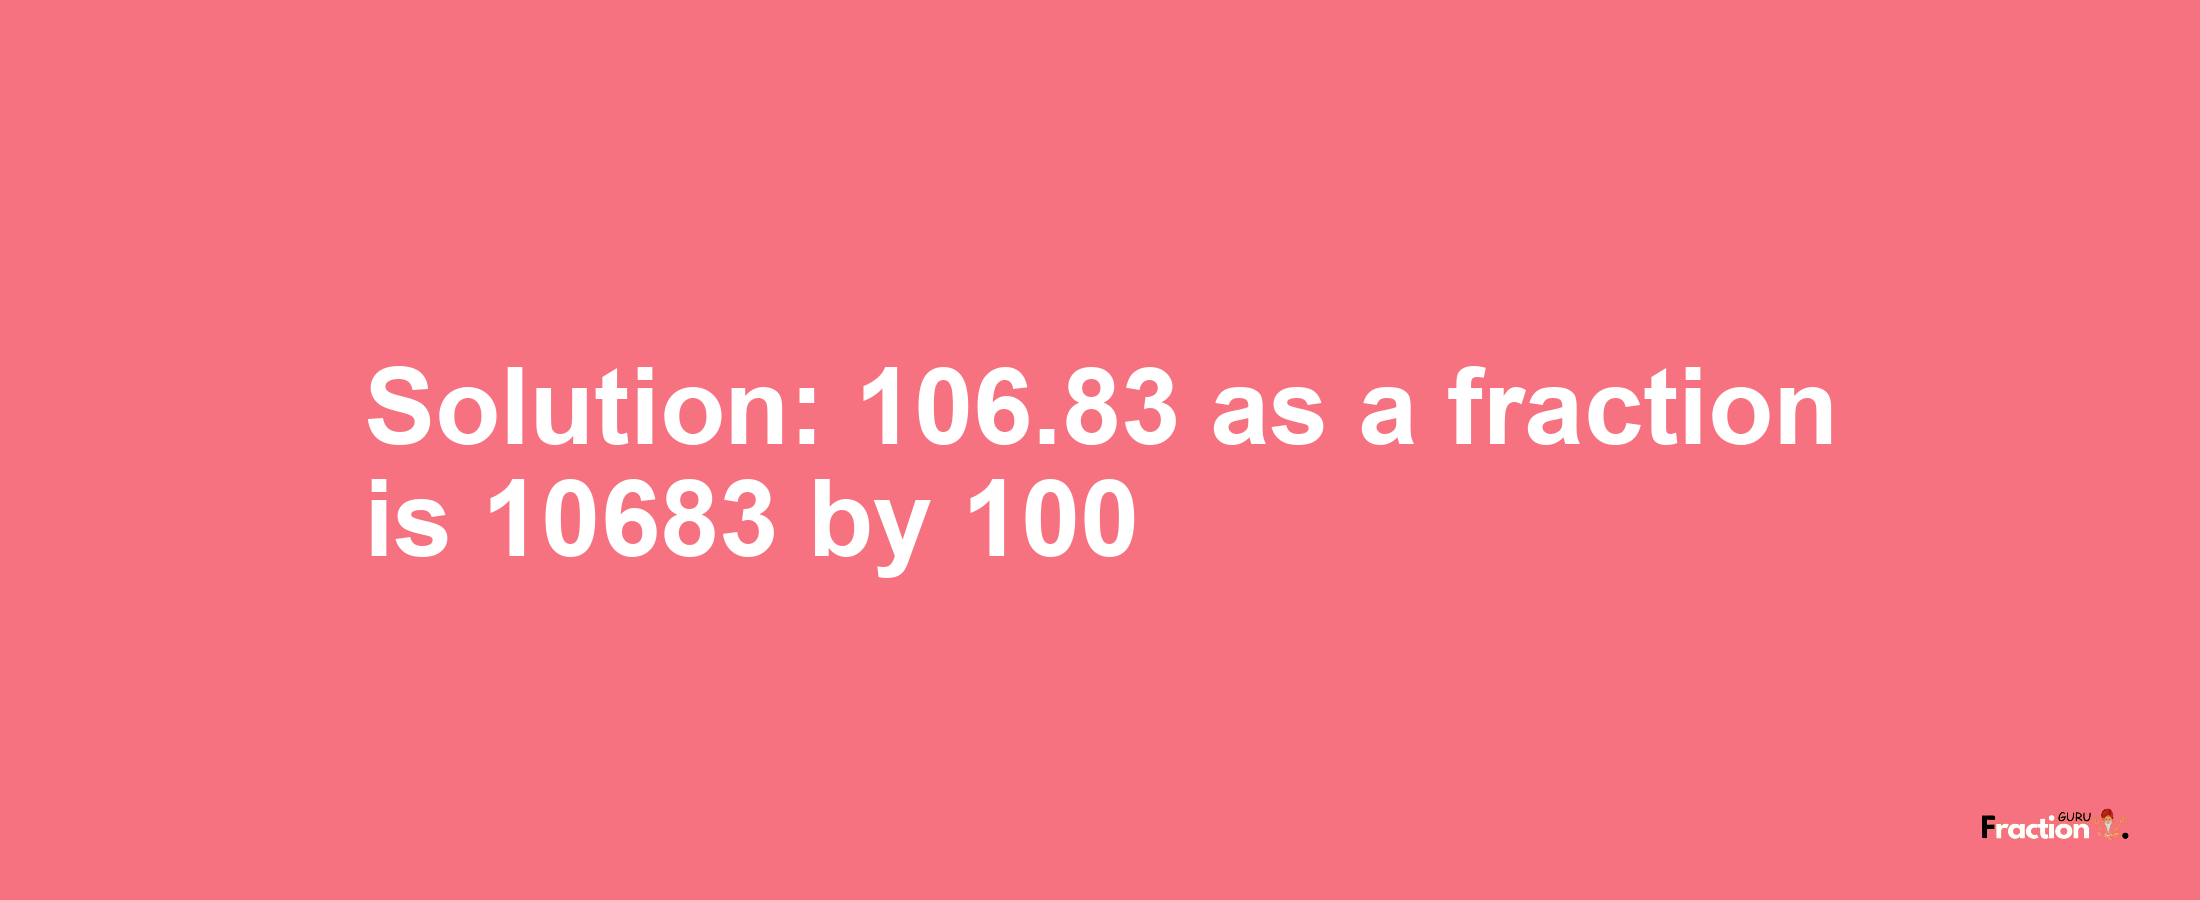 Solution:106.83 as a fraction is 10683/100